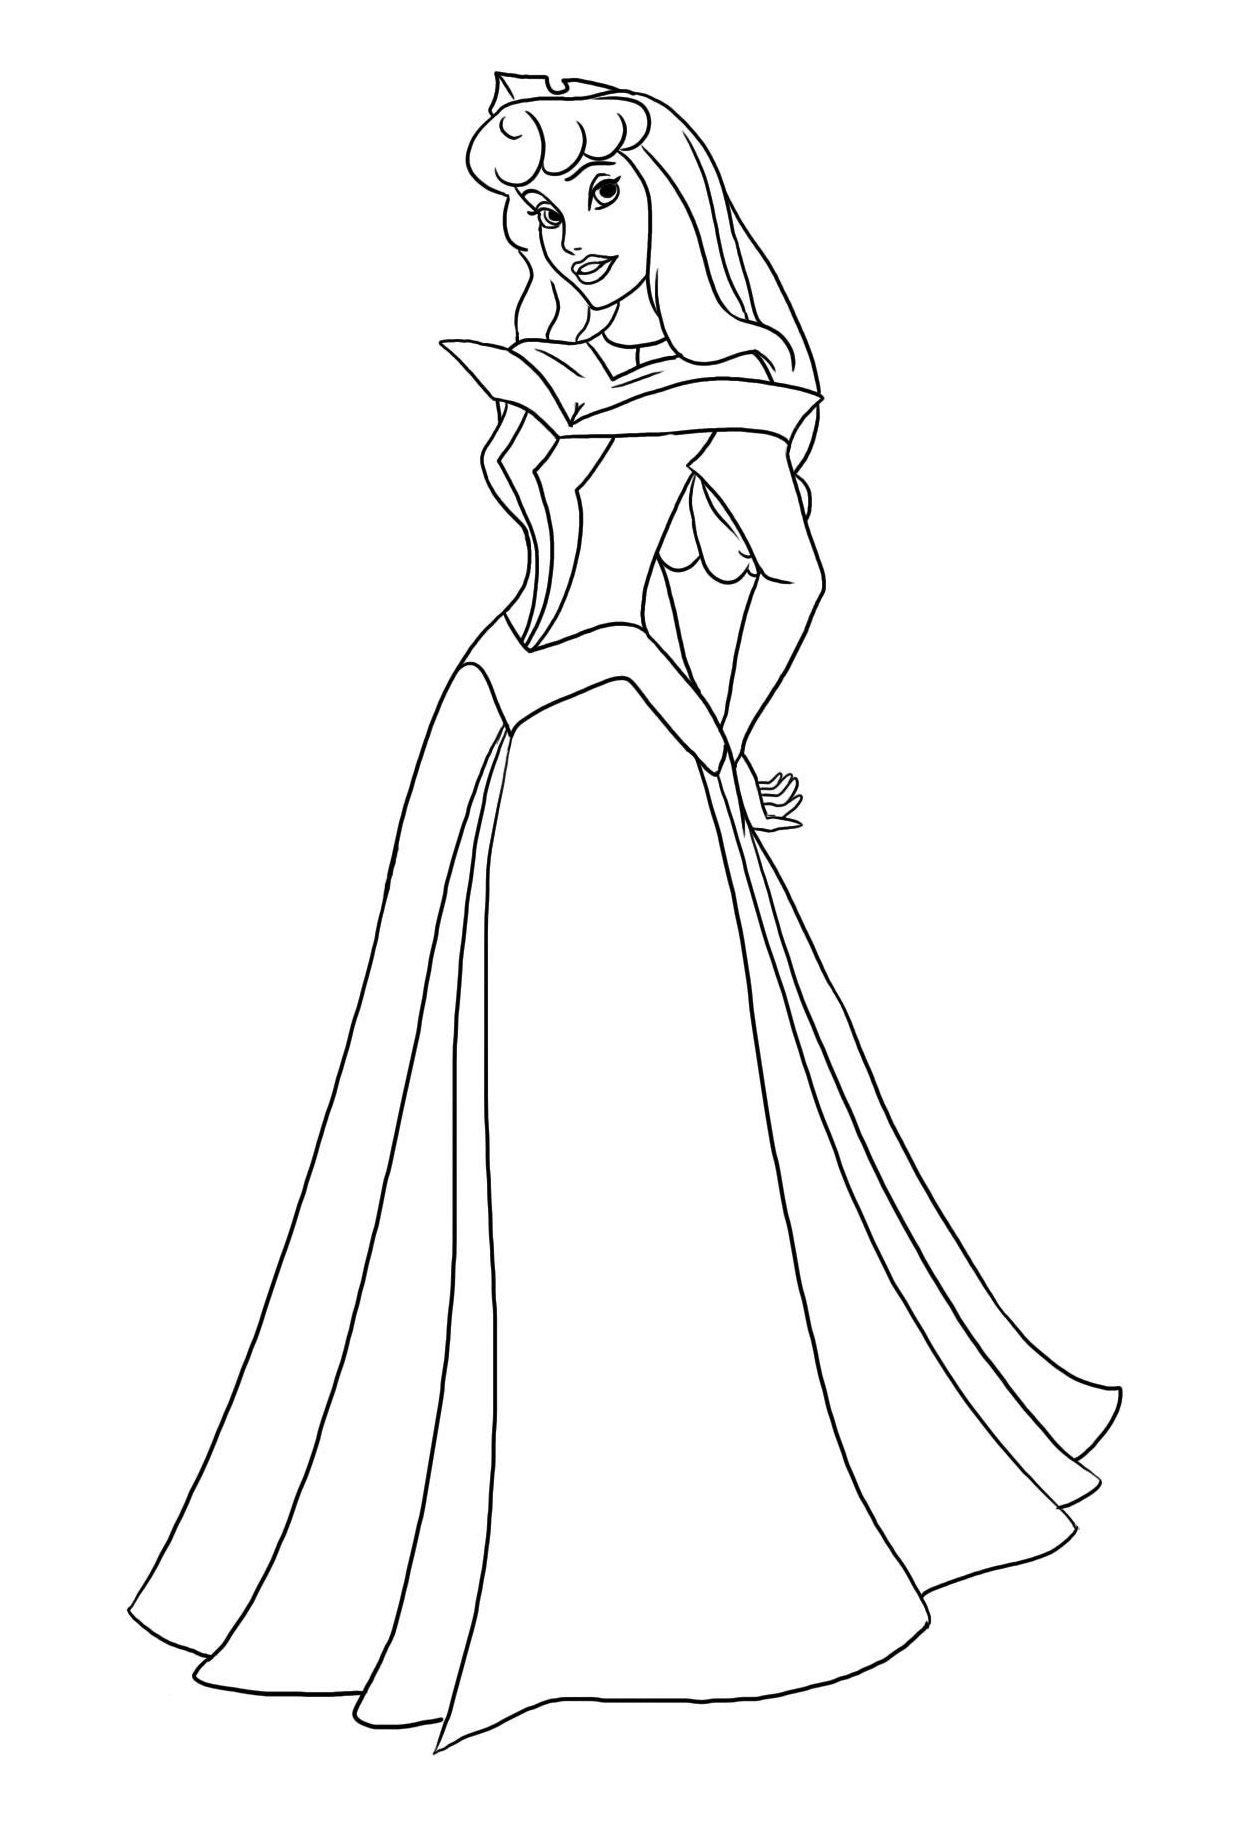 Sleeping Beauty dress coloring book to print and online